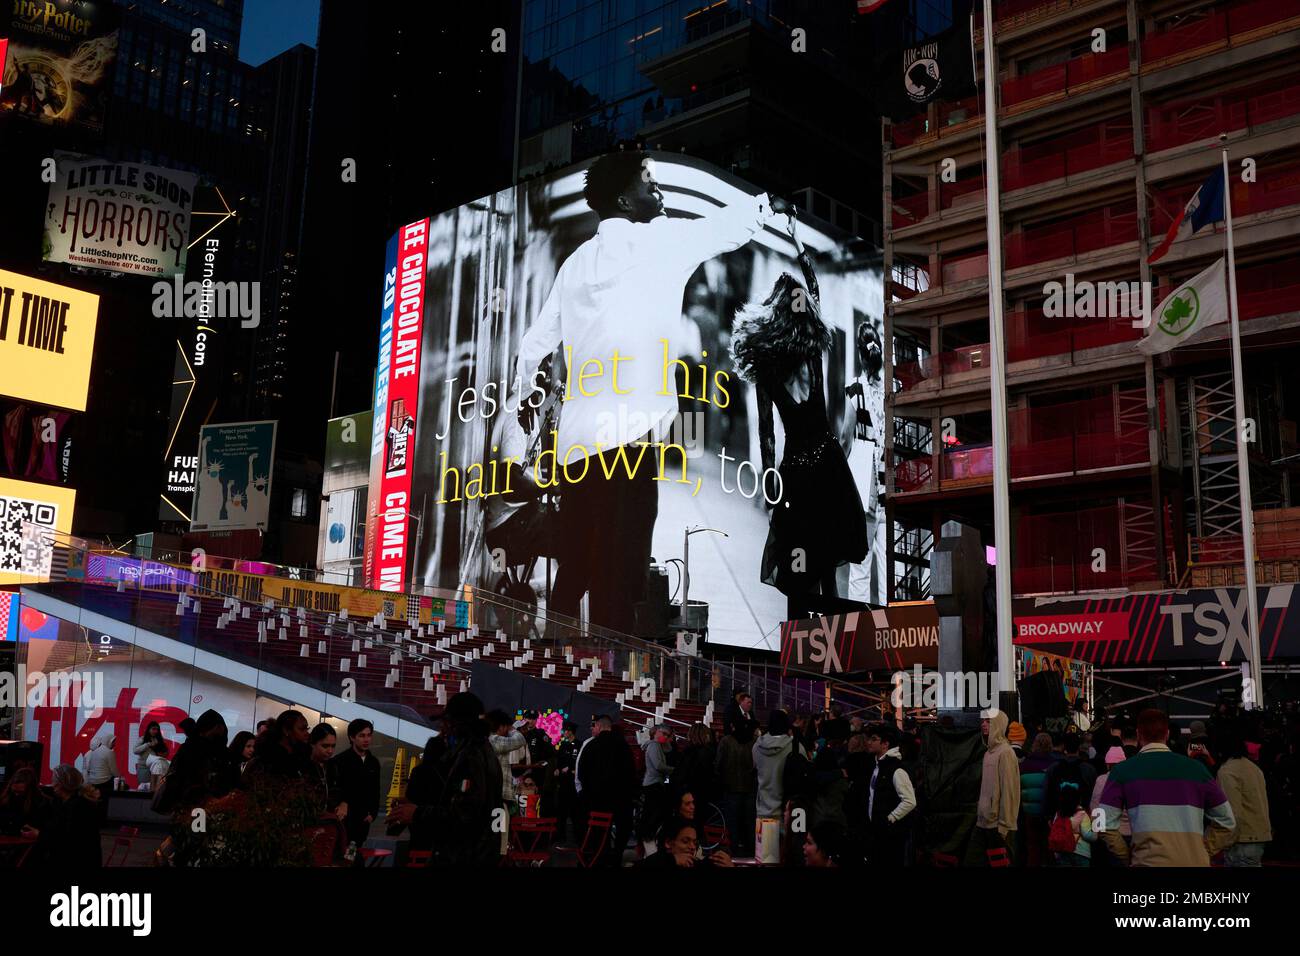 https://c8.alamy.com/comp/2MBXHNY/image-distributed-for-hegetsuscom-jesus-let-his-hair-down-too-billboards-appear-in-new-york-times-square-on-the-evening-of-march-16-2022-in-new-york-he-gets-us-is-an-ad-campaign-that-presents-an-unexpected-and-fresh-take-on-jesus-life-and-experiences-loren-matthewap-images-for-hegetsuscom-2MBXHNY.jpg